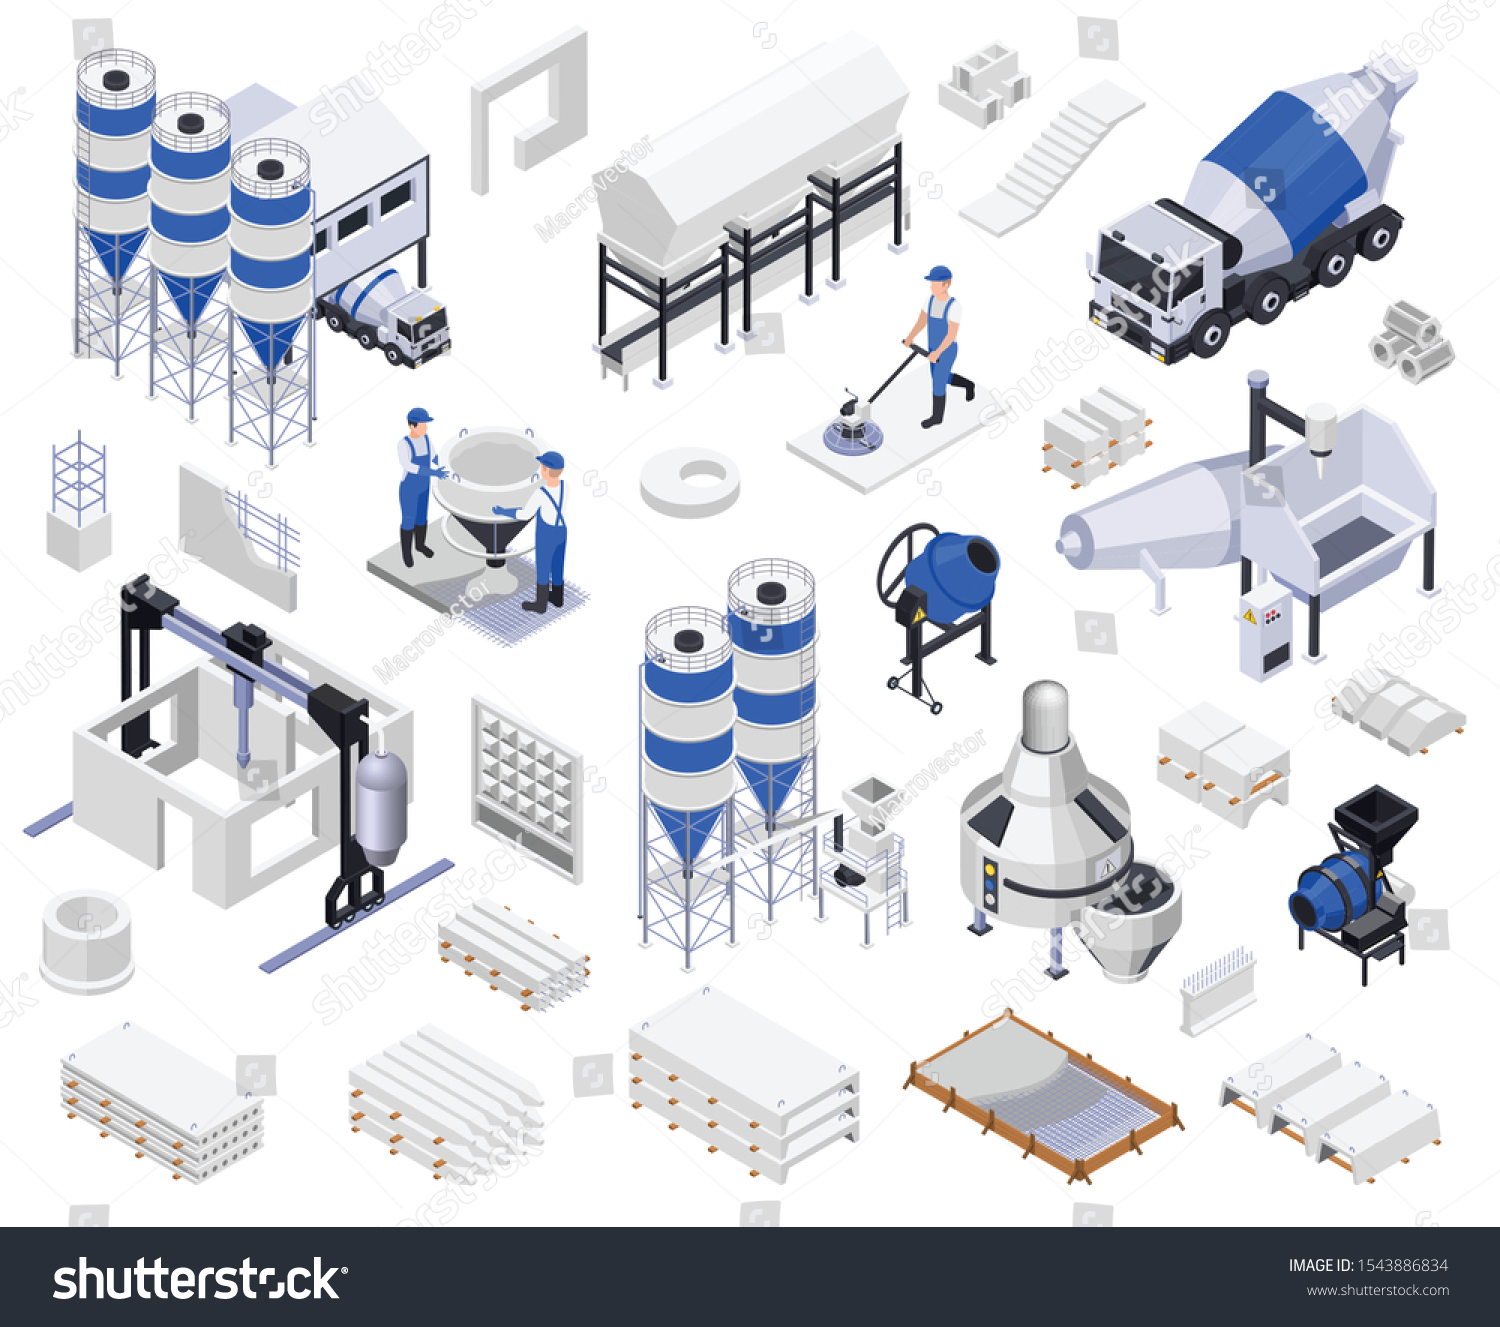 SVG of Set of concrete cement production isometric icons with vehicles people and industrial machines on blank background vector illustration svg